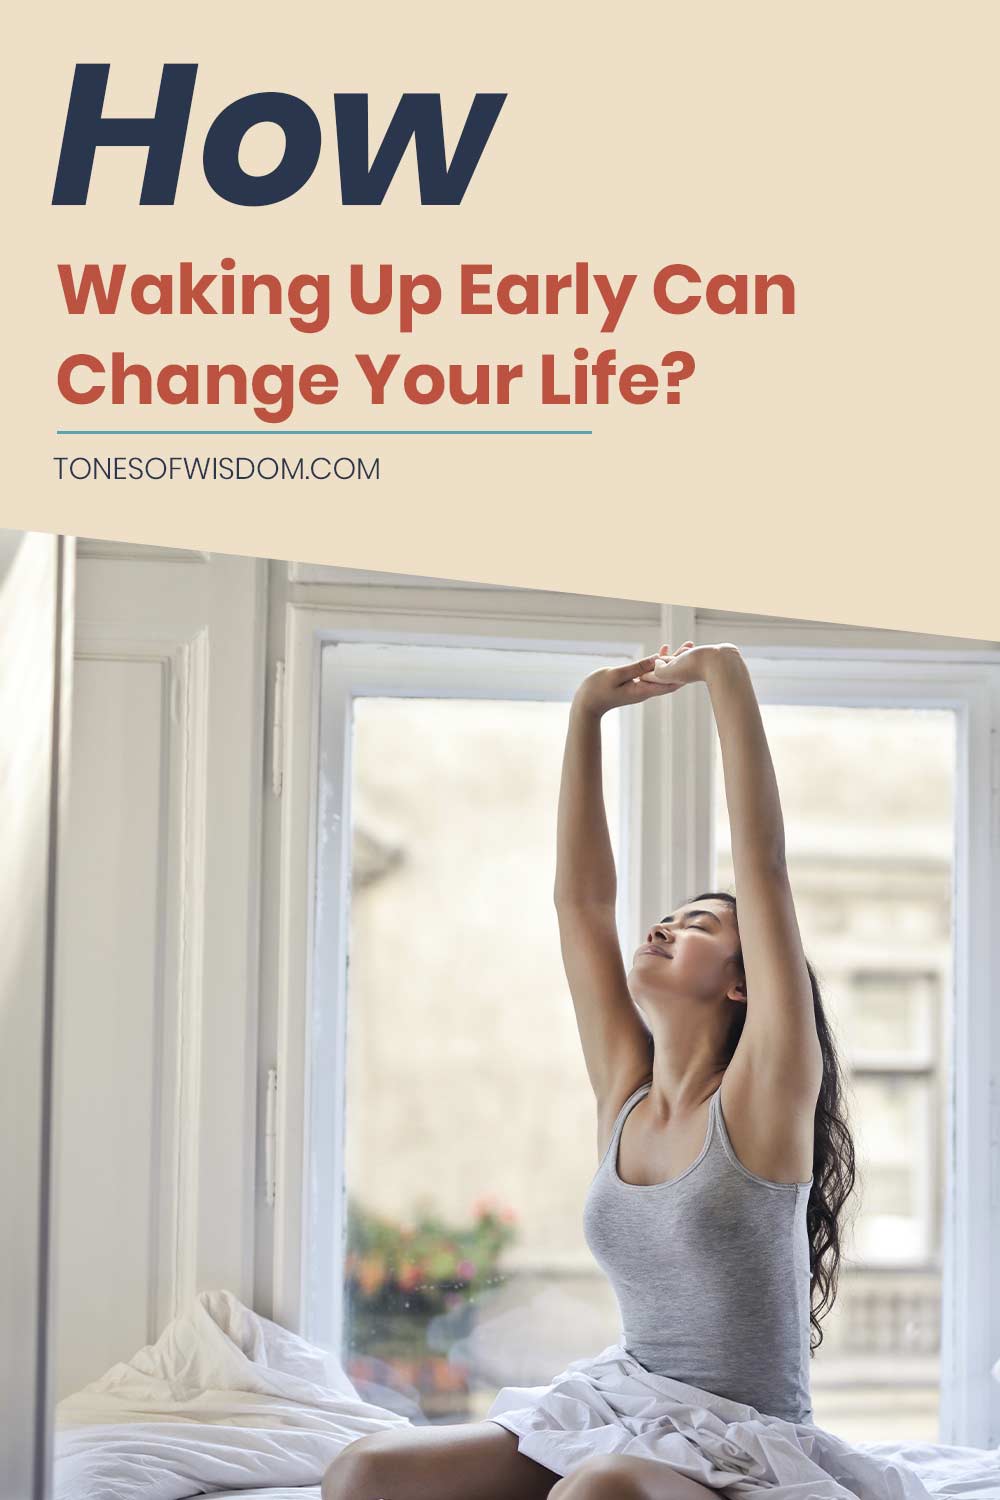 How Waking Up Early Can Change Your Life?